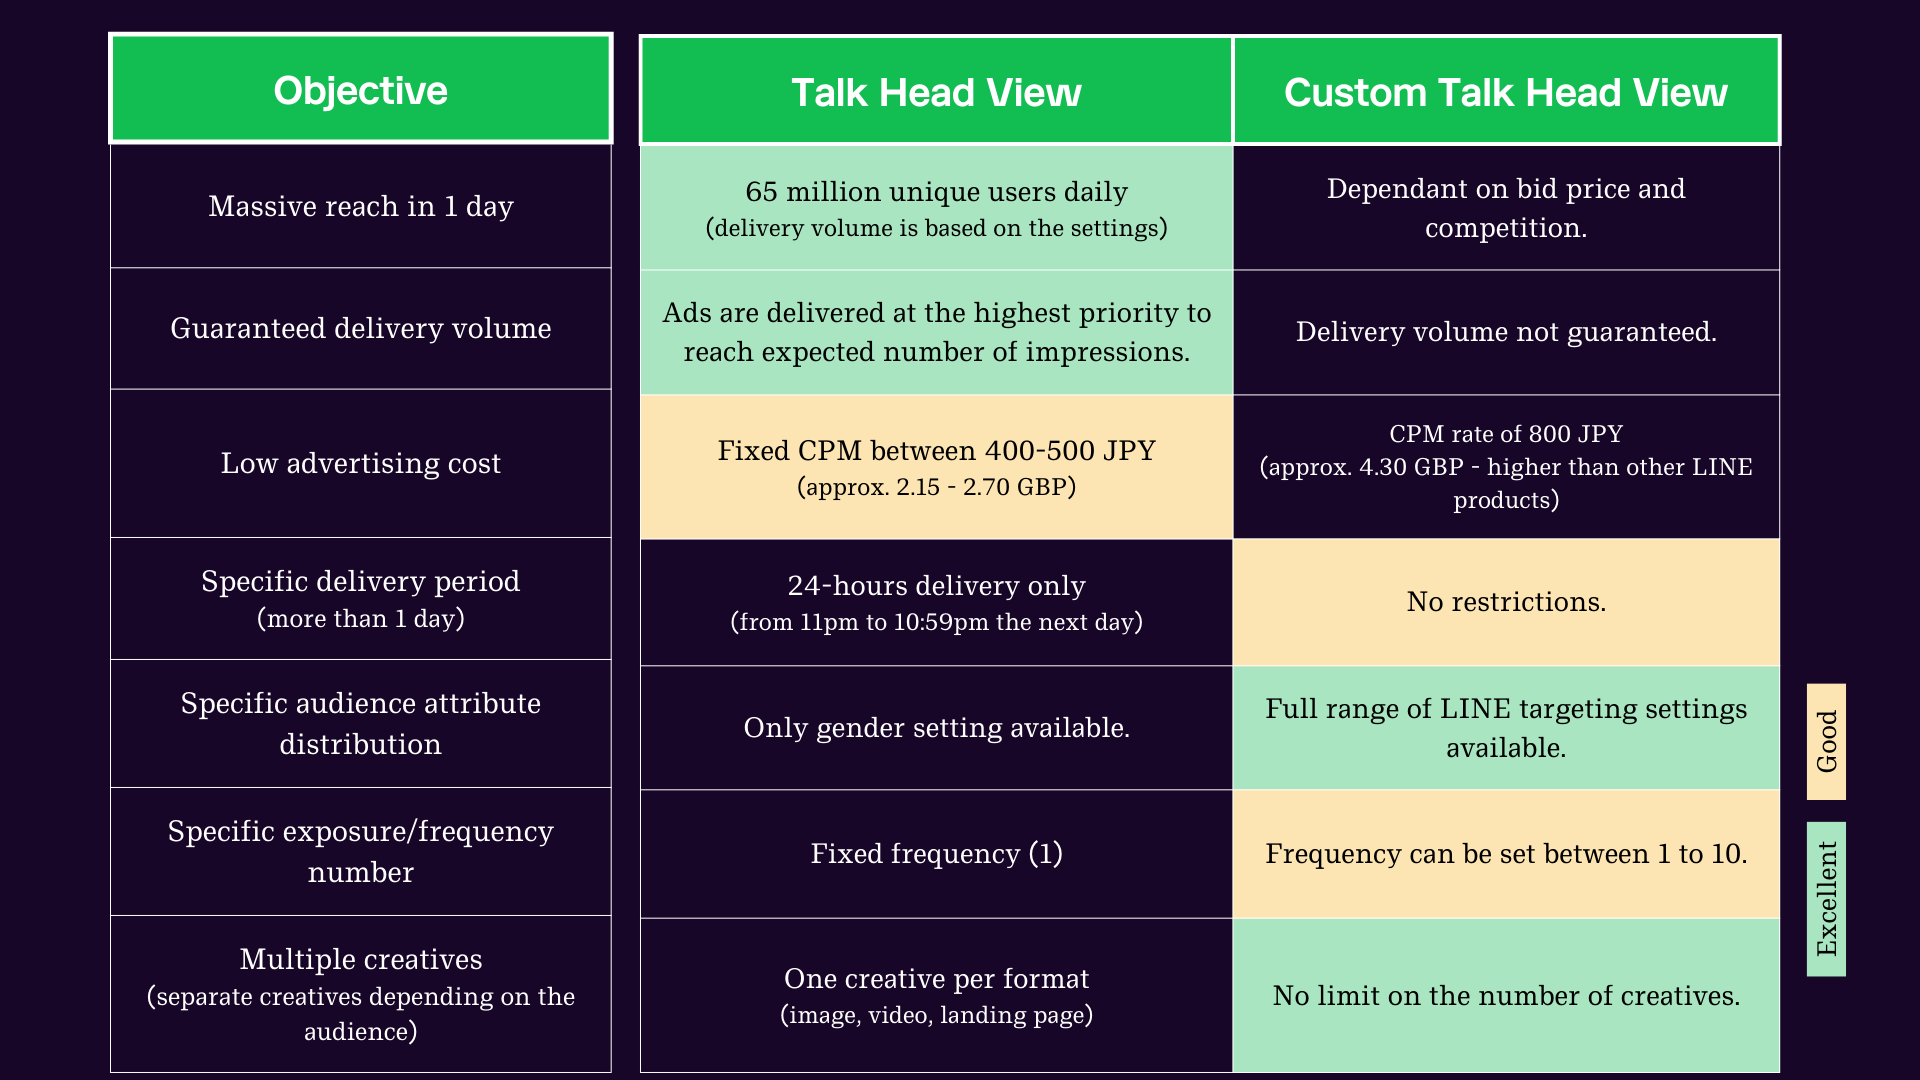 This image is a table showcasing differences between the regular and custom LINE Talk Head View options based on the objective.